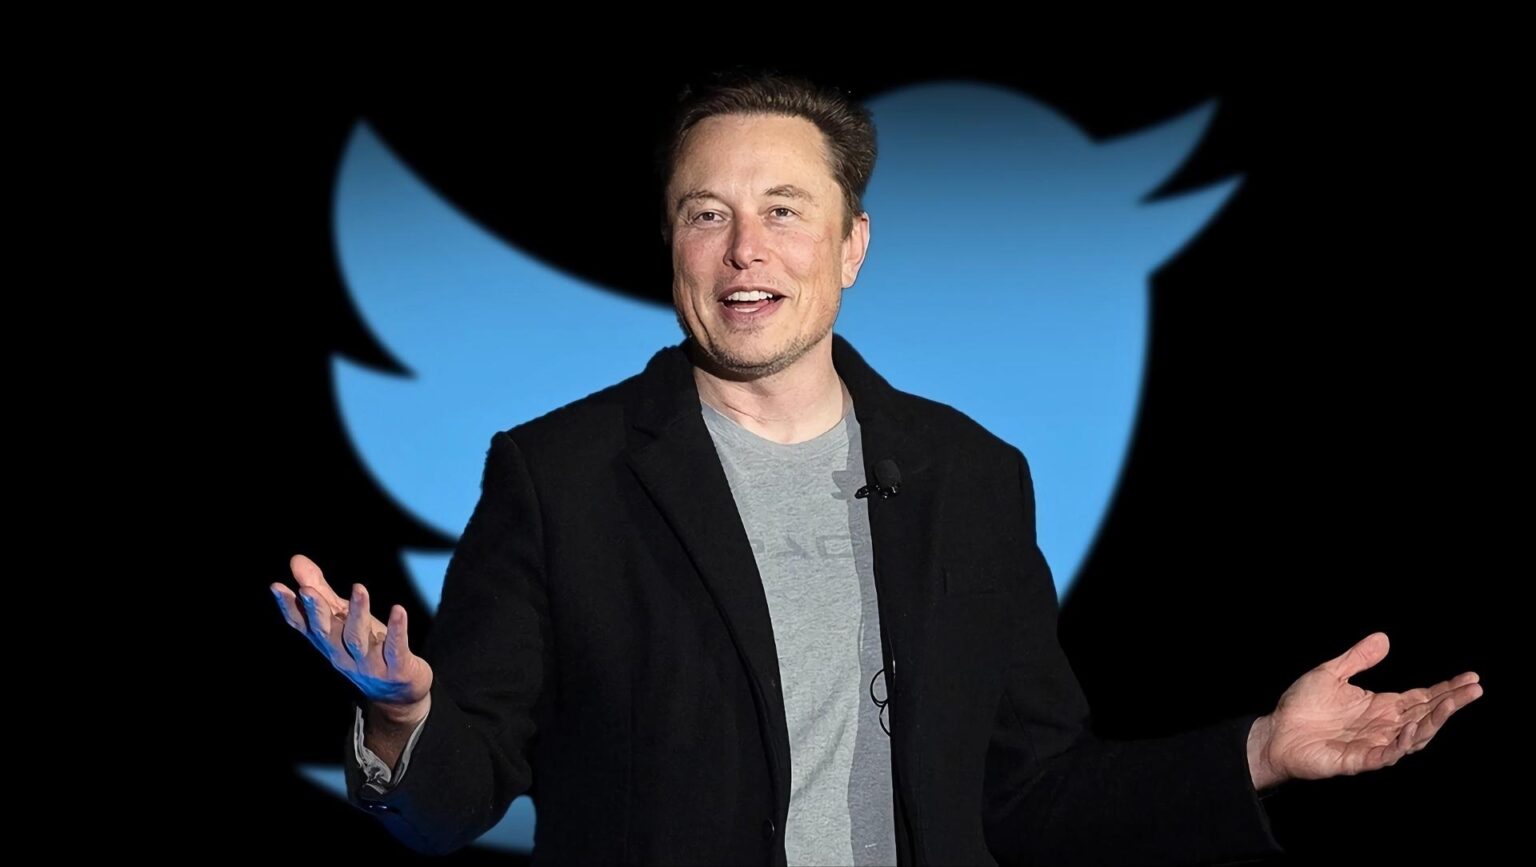 Elon Musk Implements Temporary Reading Limit on Twitter During Outage